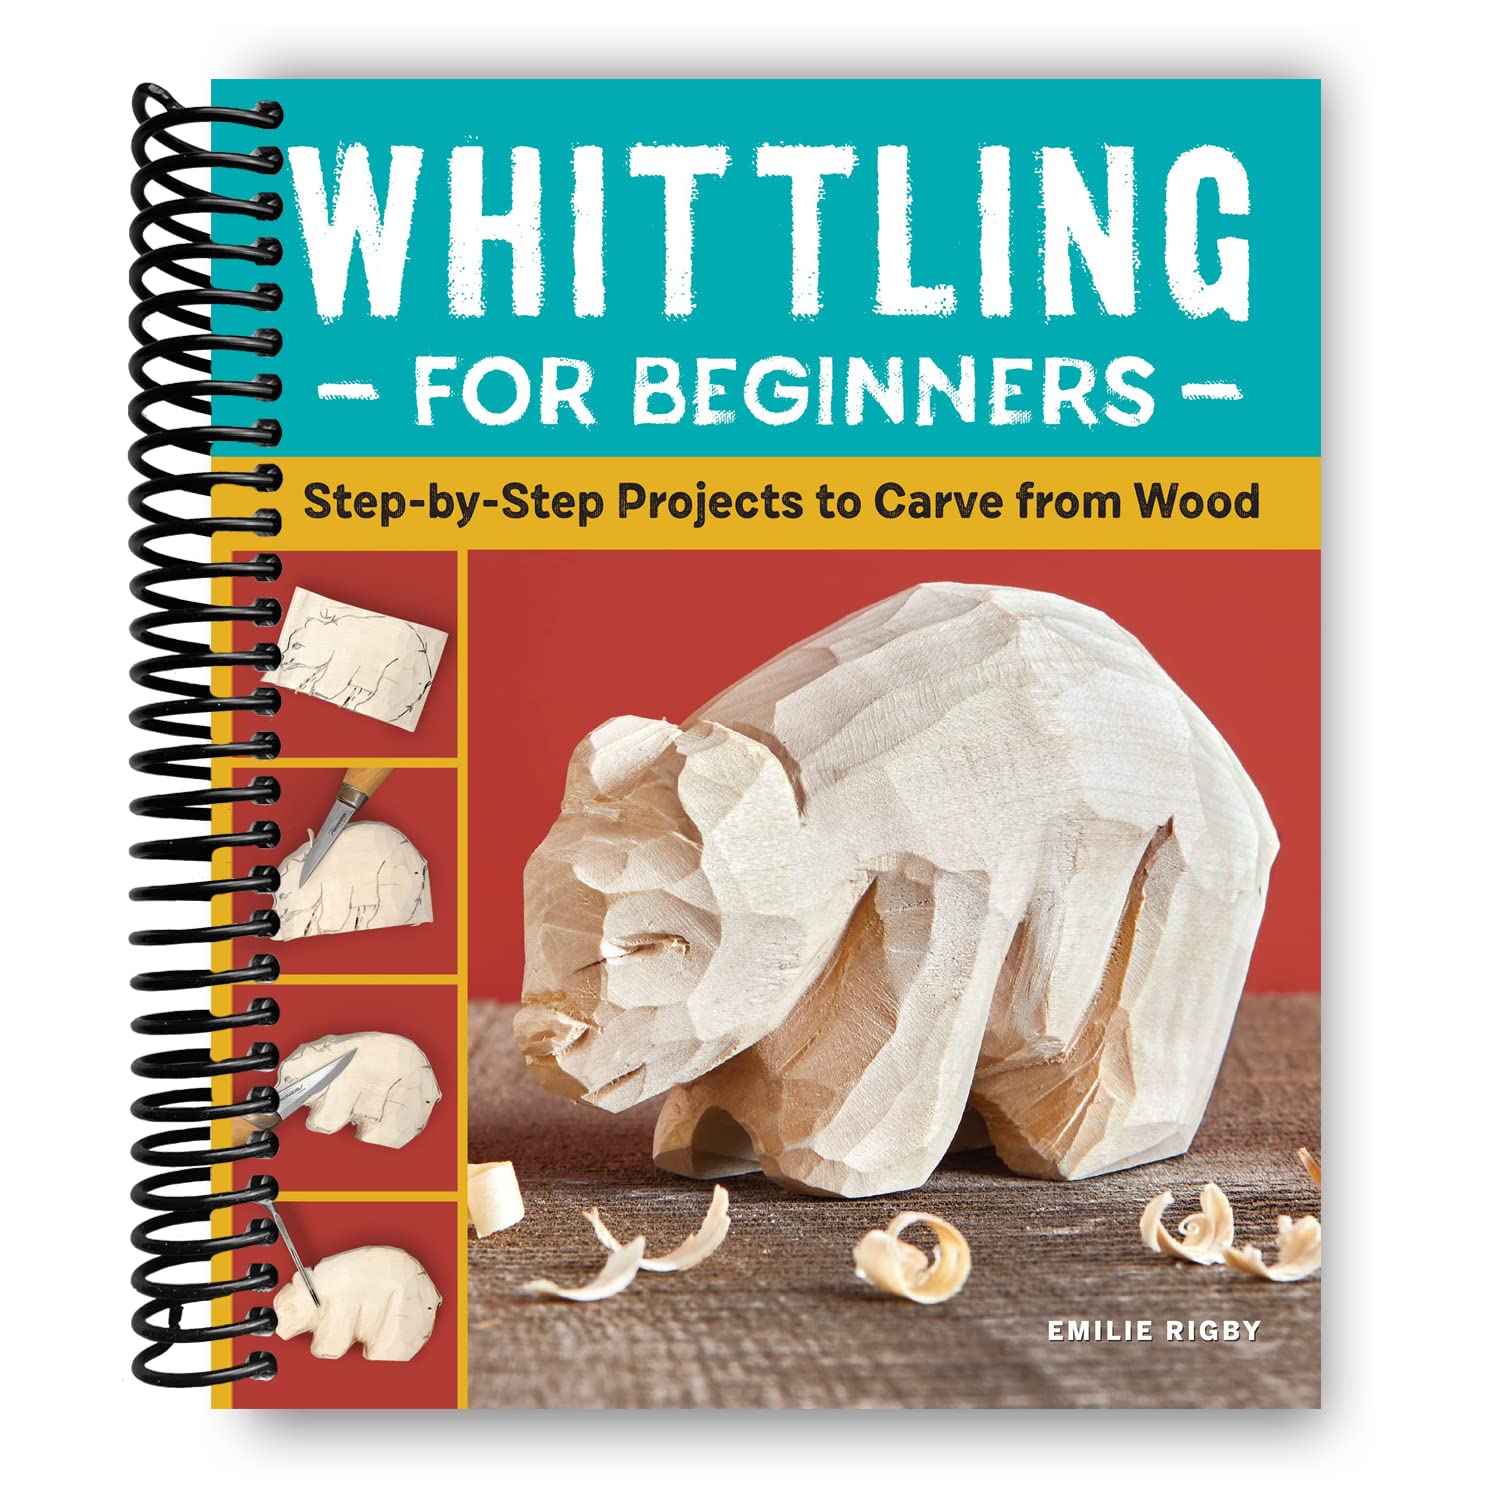 The Big Book of Whittling for Beginners: 20 Easy and Fun Whittling Project Ideas and Design Patterns You Can Carve from Wood With Step by Step Wood Carving Instructions and Pictures [Book]